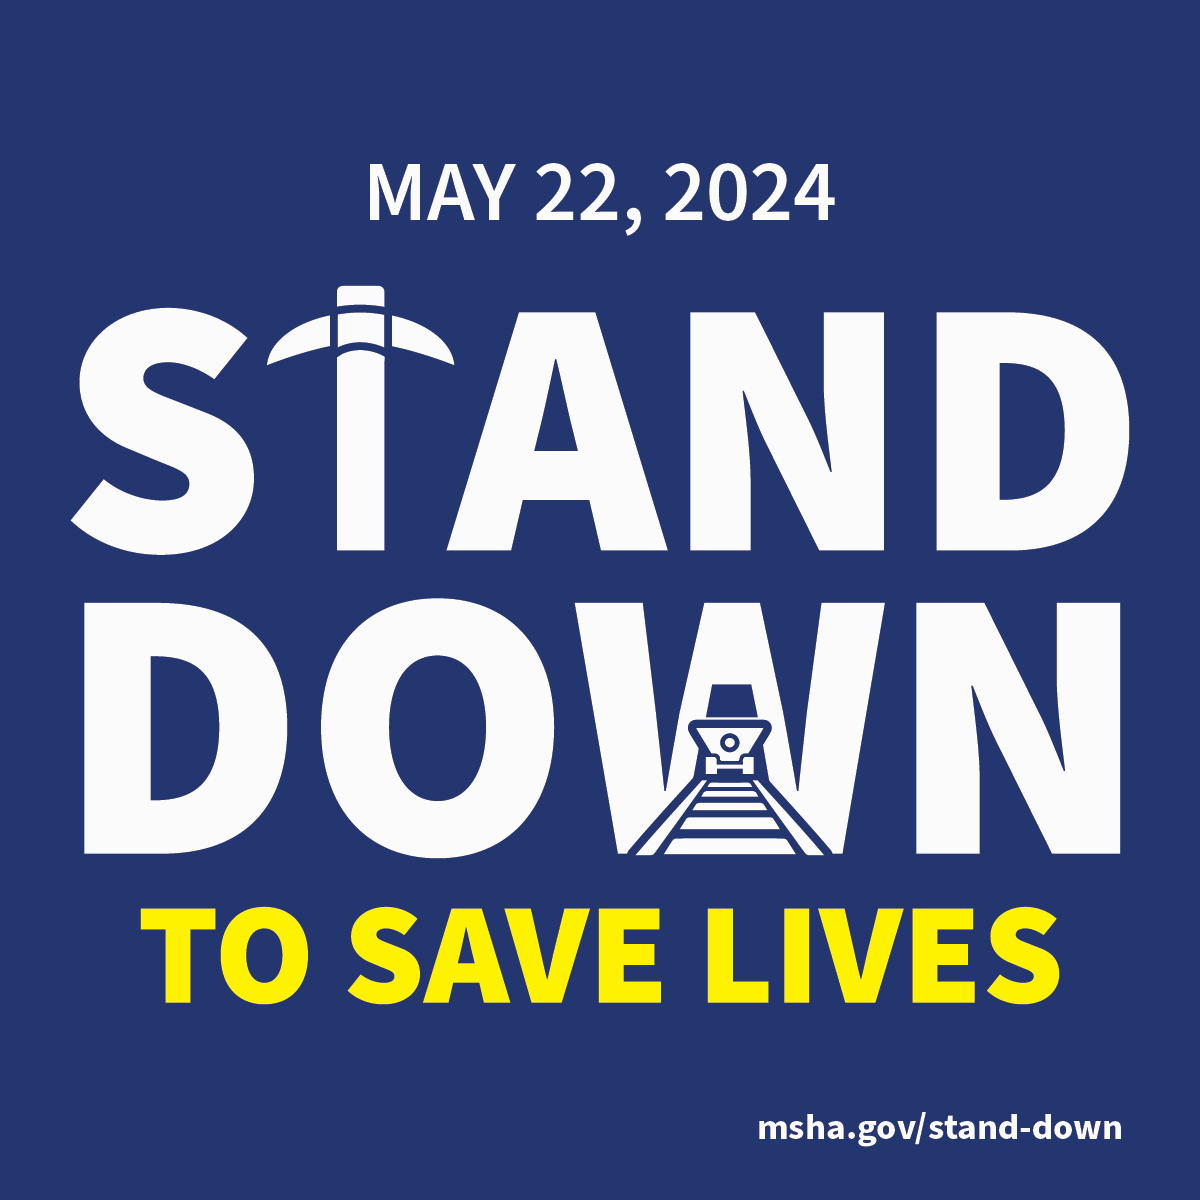 🛑 Stand Down to Save Lives 2024 🛑

Join MSHA's 2nd annual ‘Stand Down to Save Lives’ event May 22nd. This national campaign aims to prevent fatalities and injuries in the mining community.

Learn more about how to participate here: l8r.it/8k9O

#StandDownToSaveLives